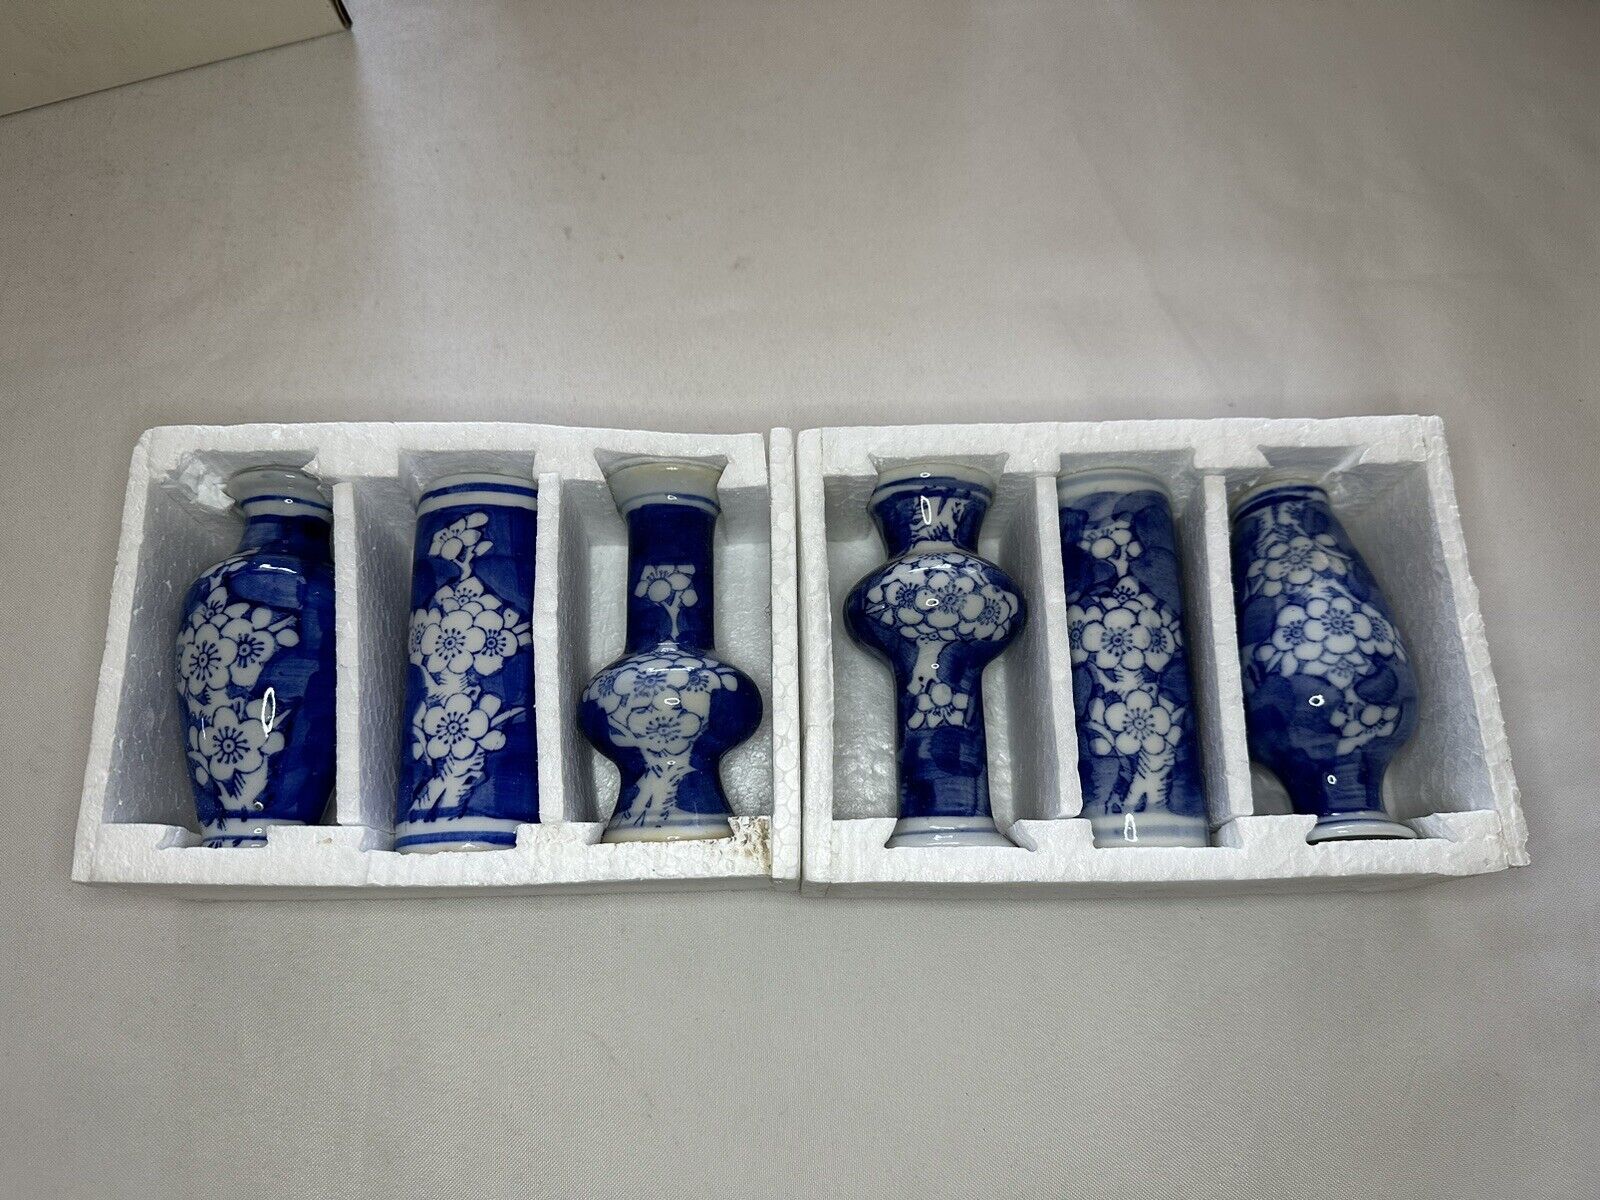 Vintage Lot of 6 Small Asian Vases - New